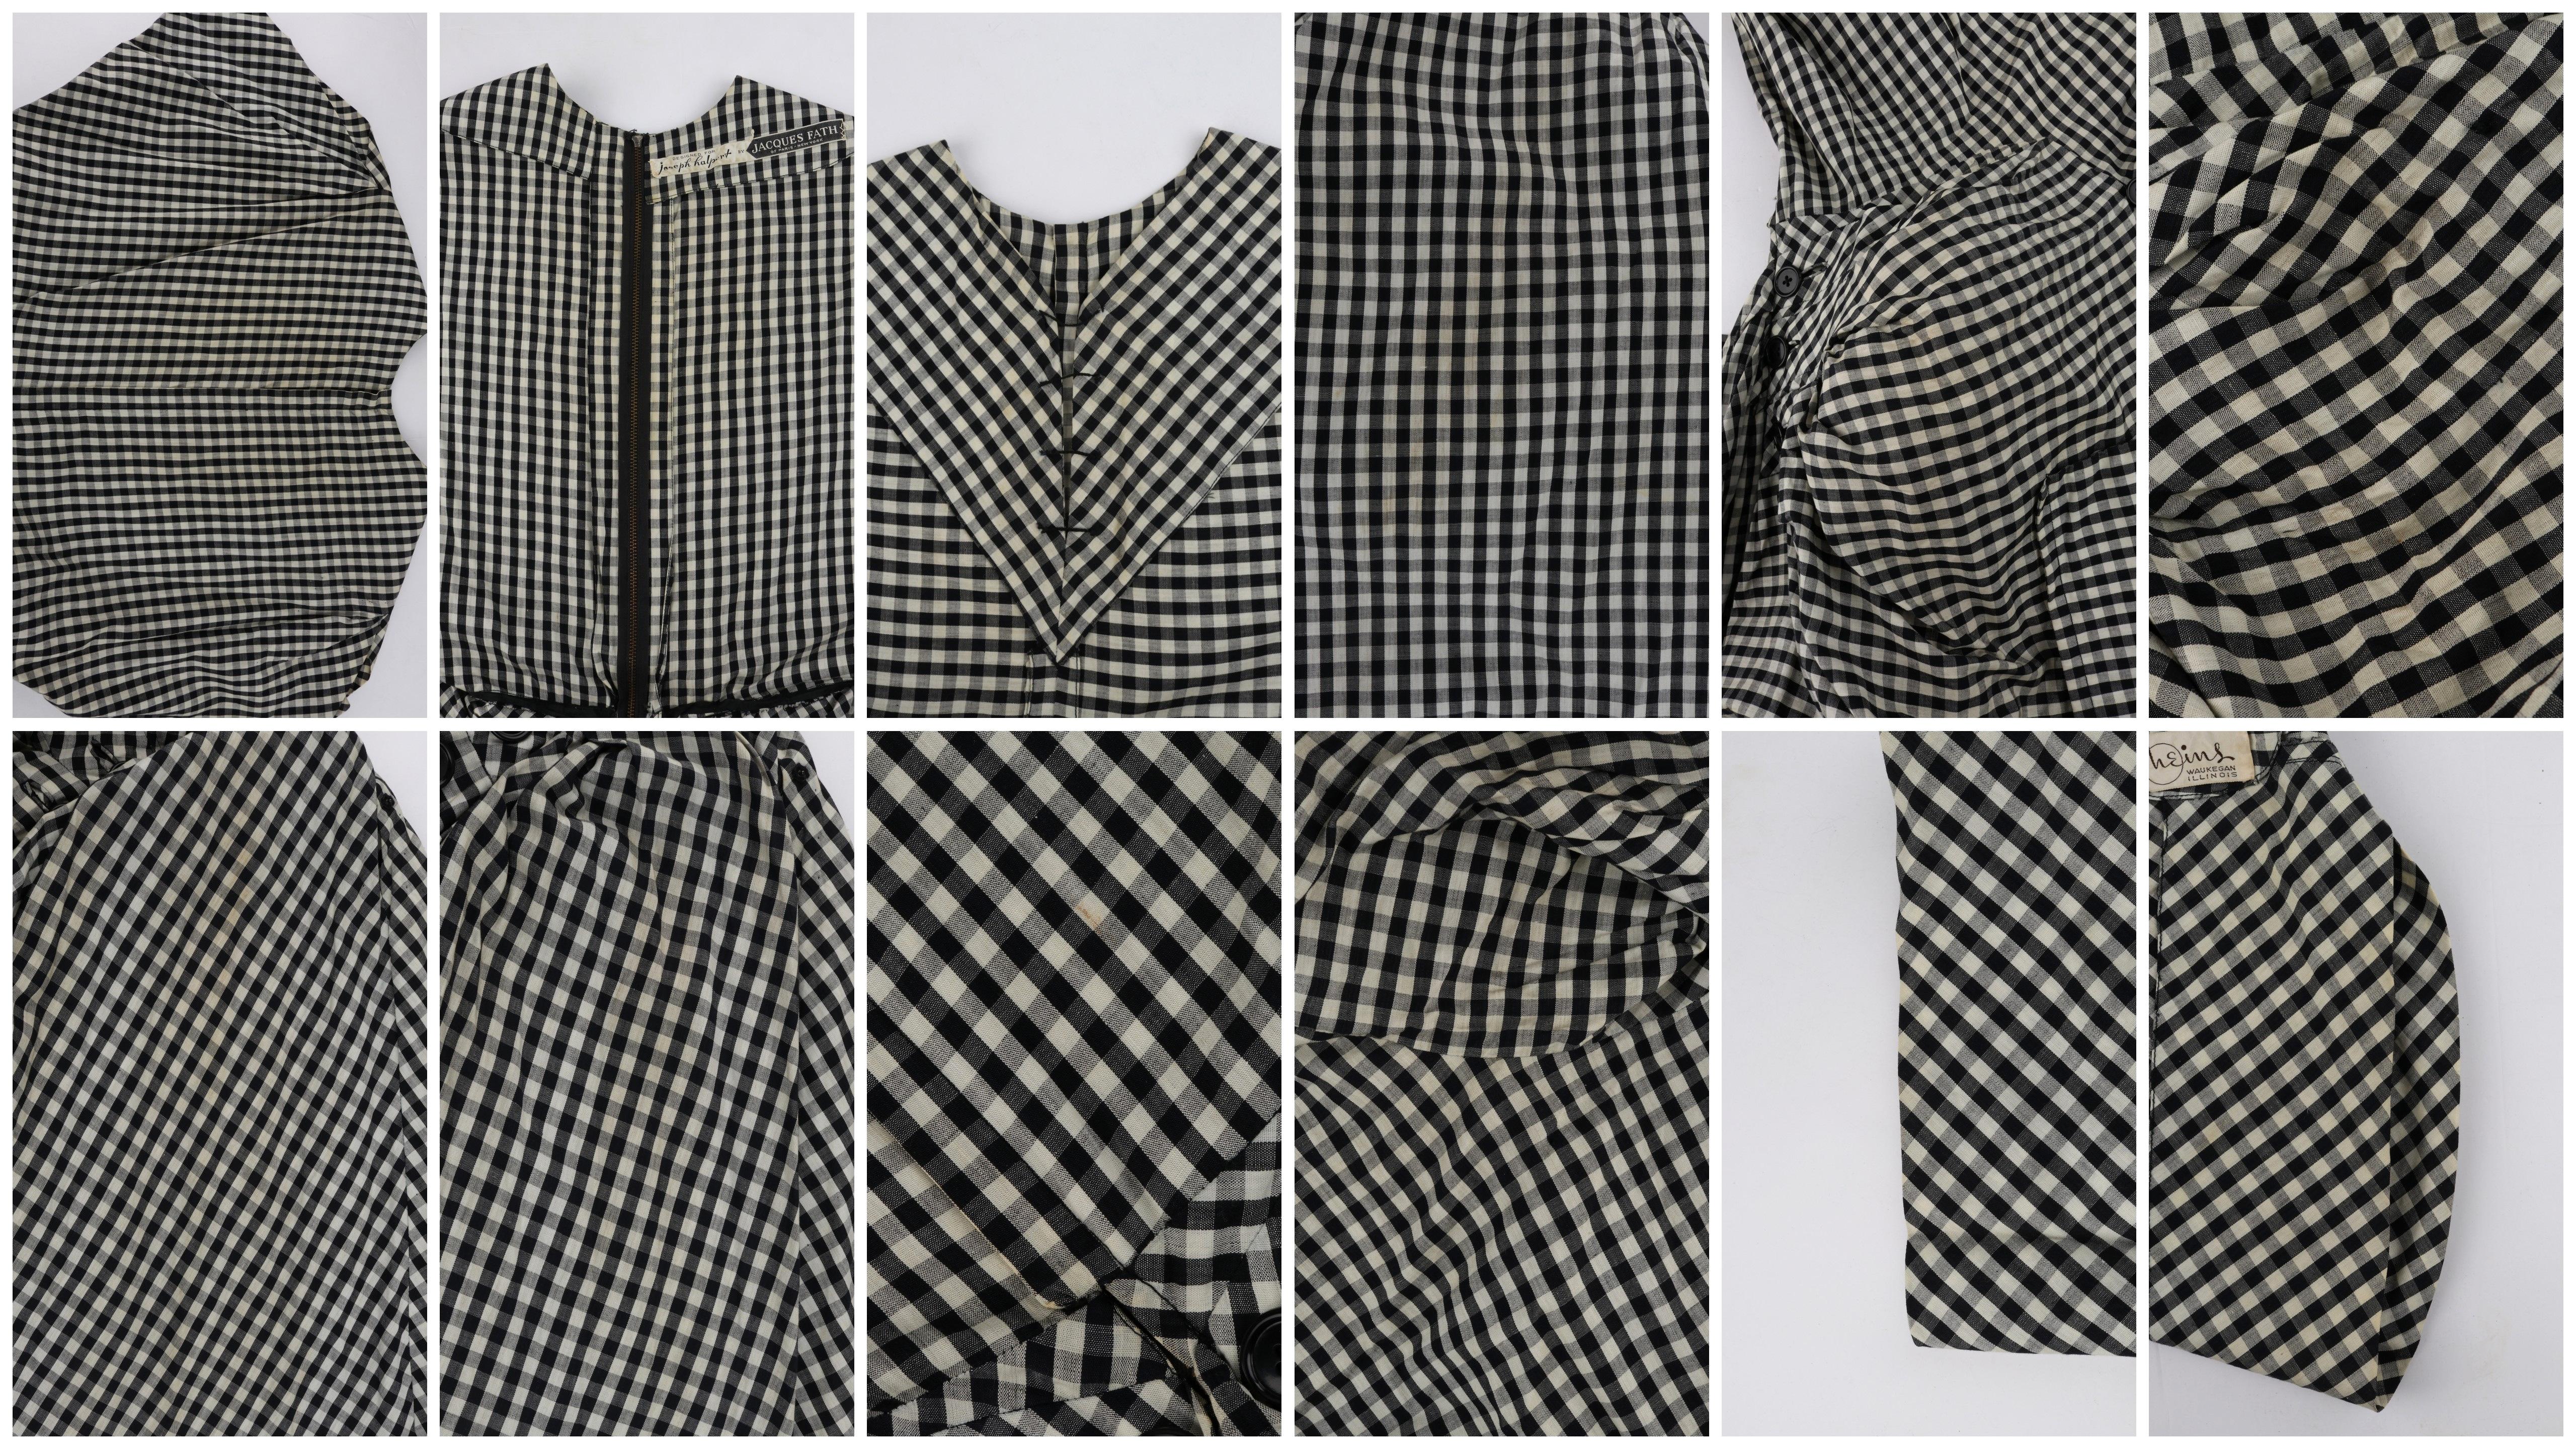 1949 S/S JACQUES FATH Black & White Gingham Fan Back Peplum Afternoon Dress For Sale 4